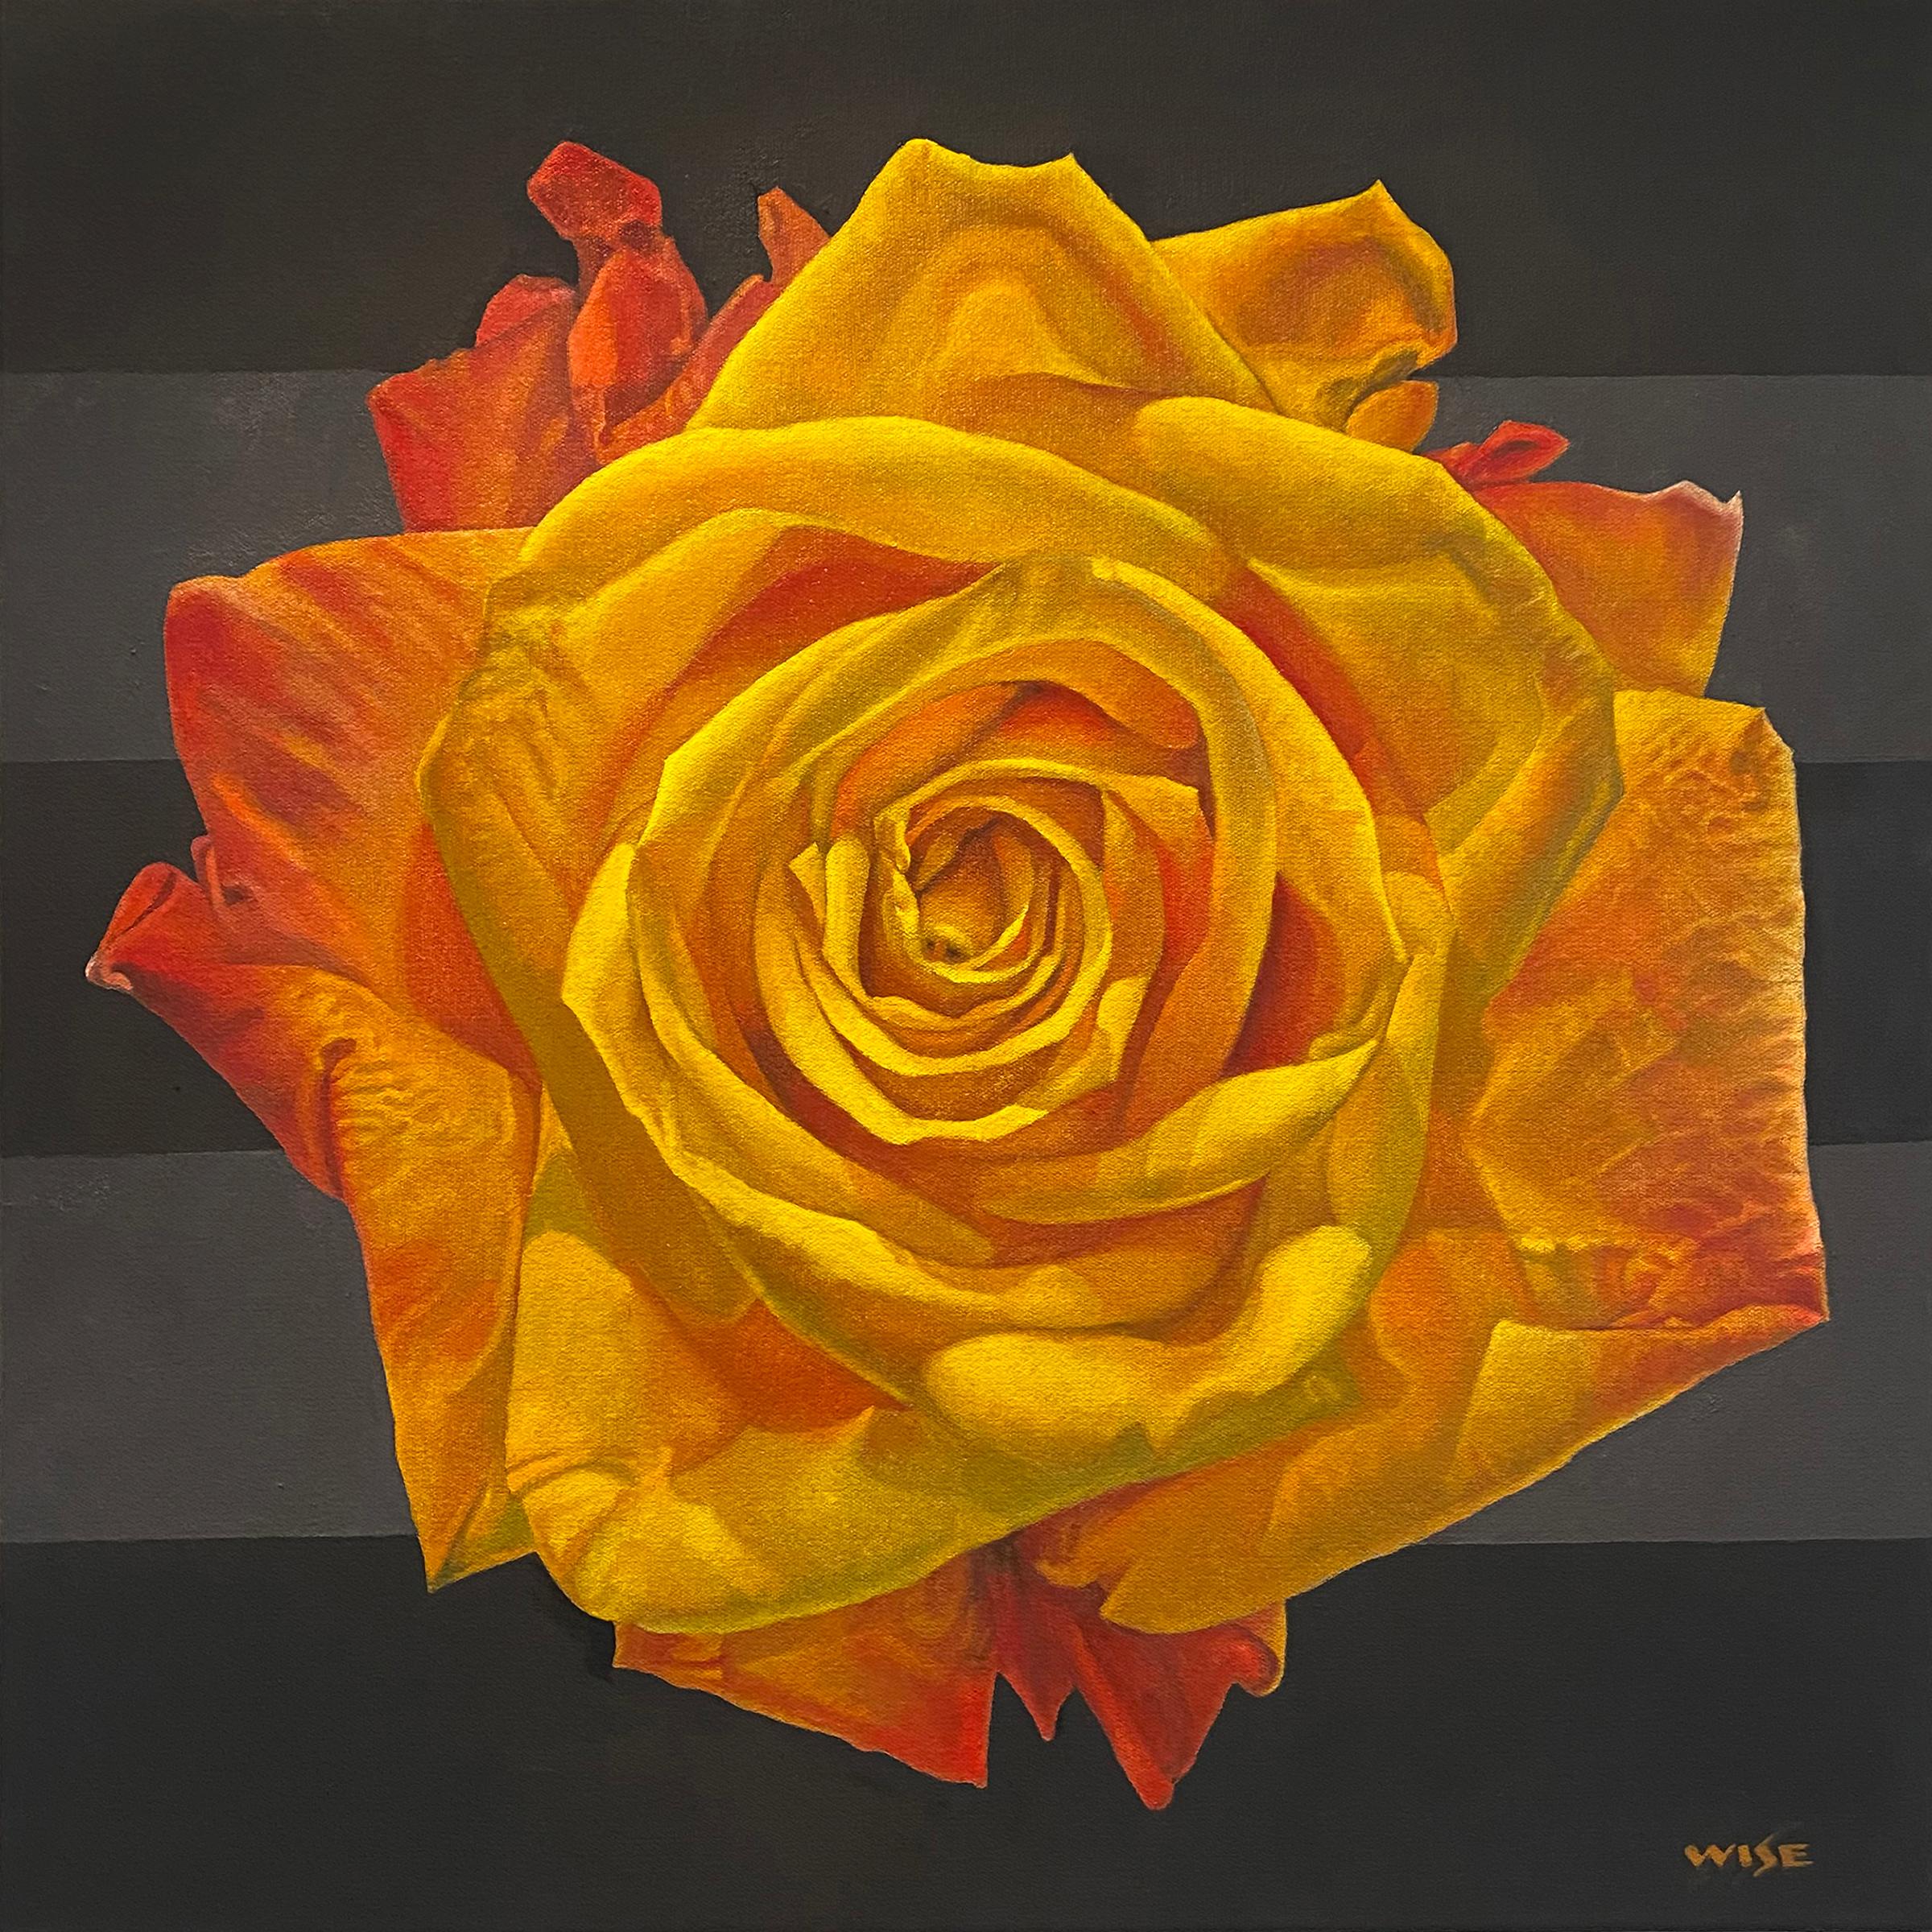 Jim Wise Still-Life Painting - "Flame Rose I" - floral painting - rose still life - Georgia O'Keeffe